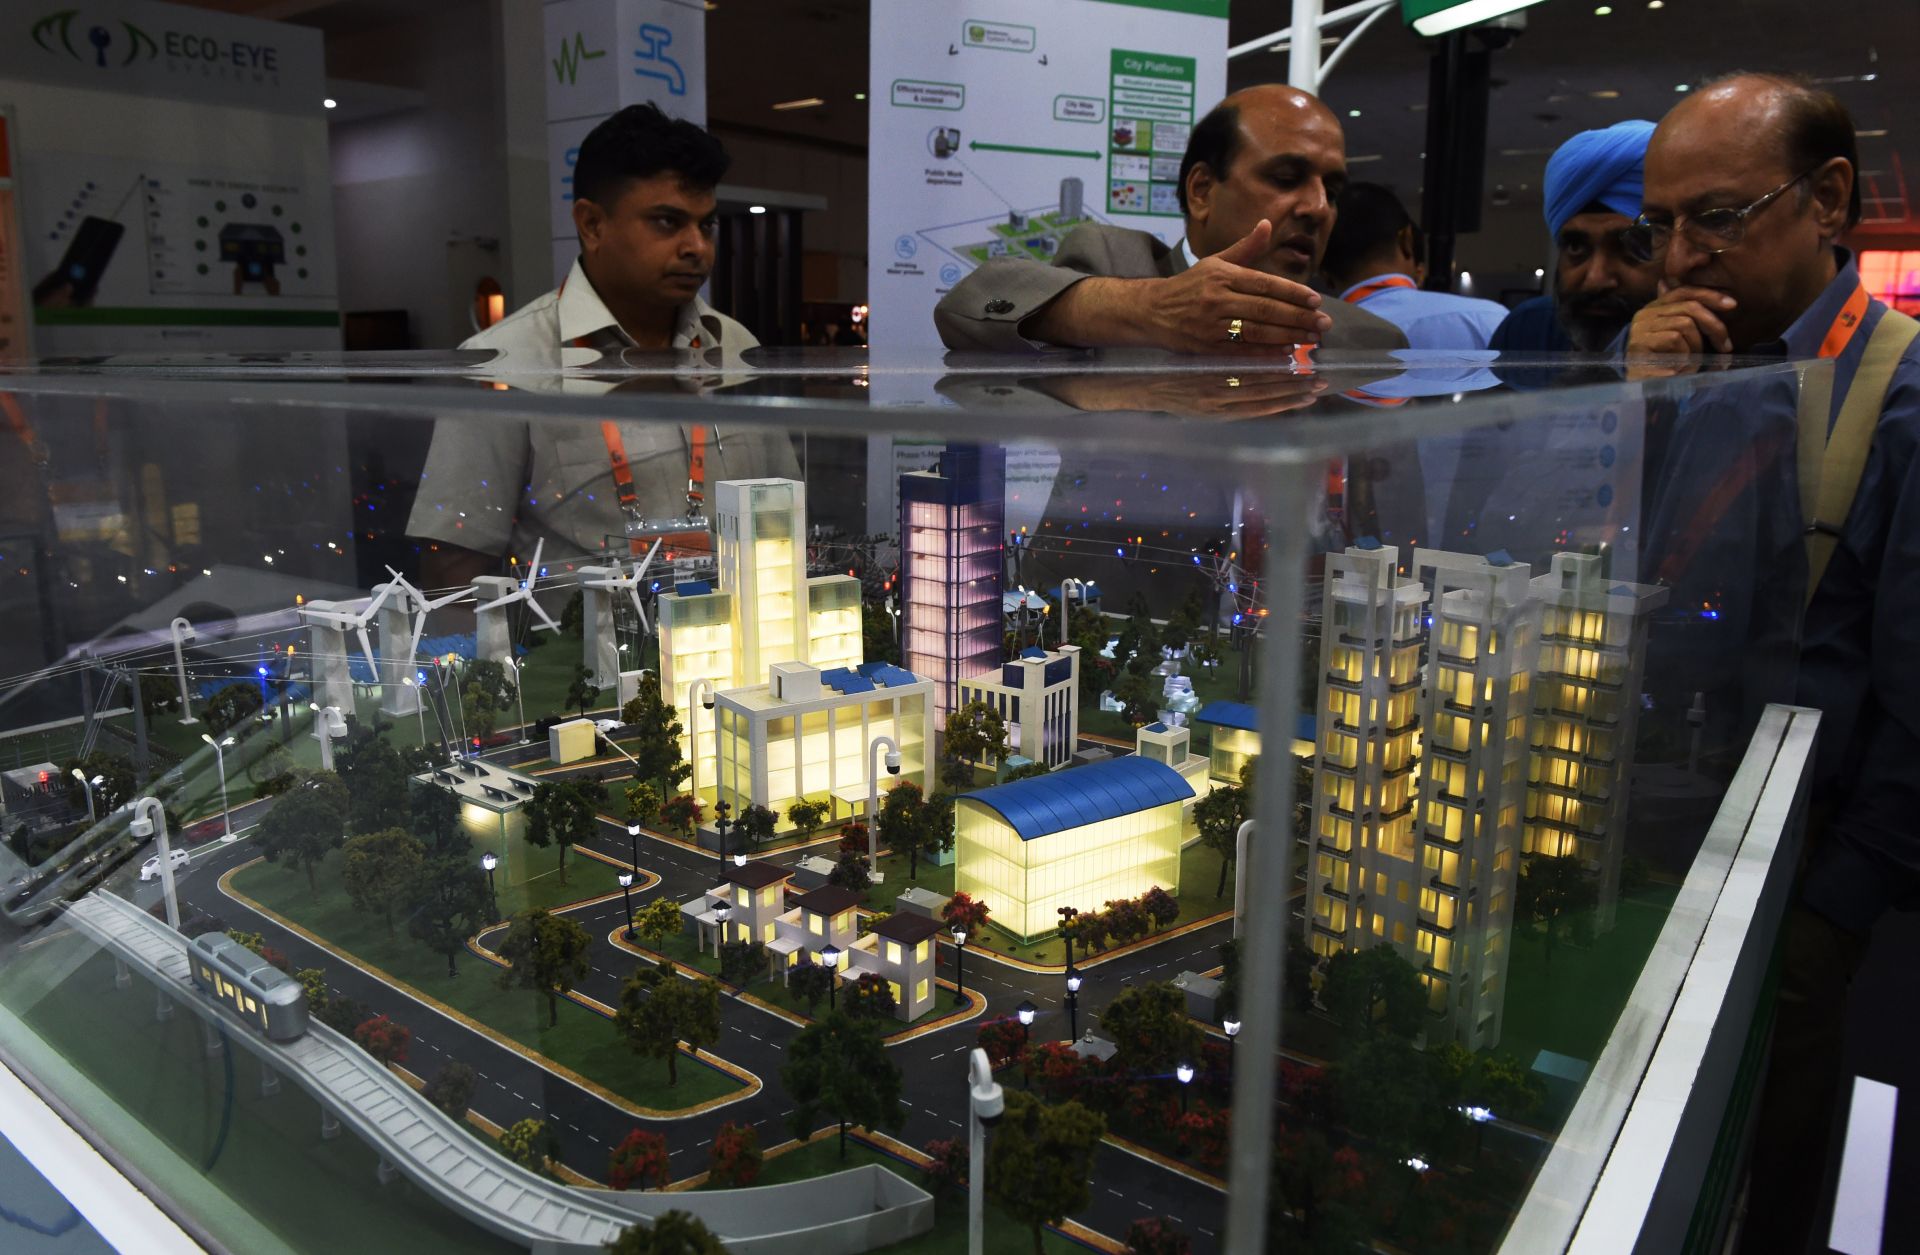 Attendees at an expo in New Delhi, India, take in a model of a "smart city," an urban area wired with connected information and communication technology systems. 